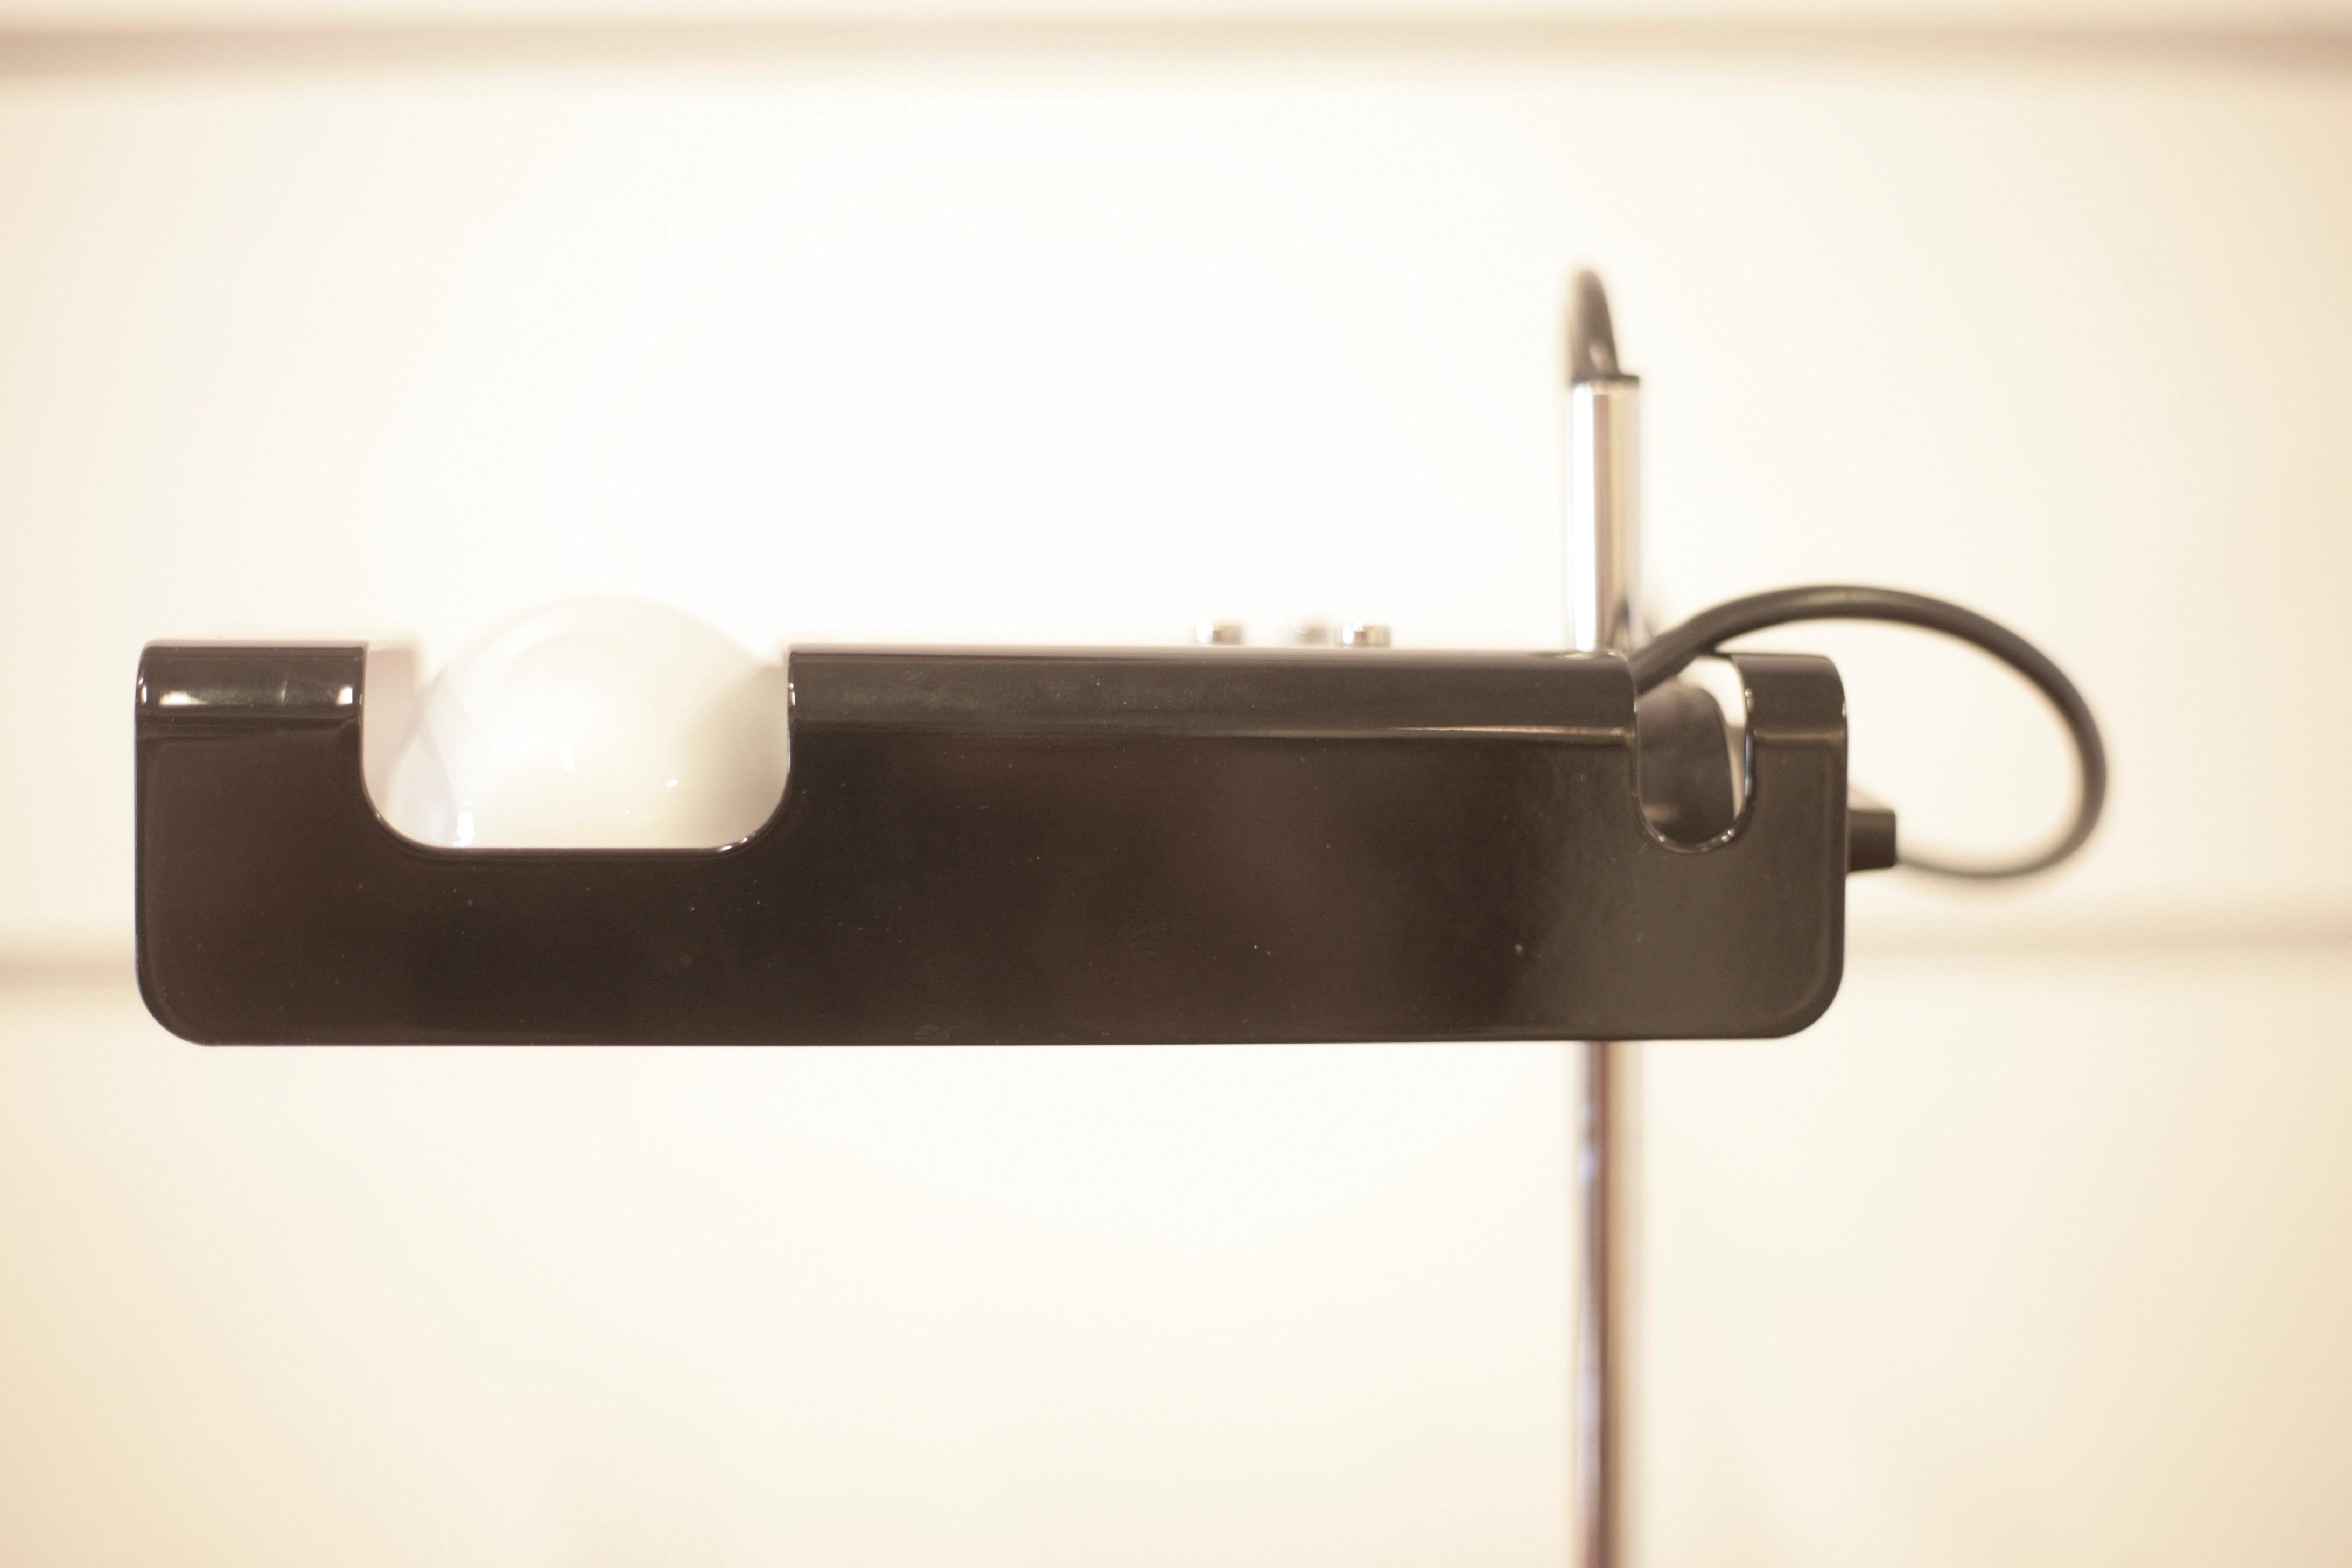 A black desk lamp designed by Joe Colombo in 1965. Stove-enameled sheet metal reflector purposely designed to take a special horizontal spot light bulb. In 1967 Spider won the Compasso d’Oro award. It is part of the permanent collections of the